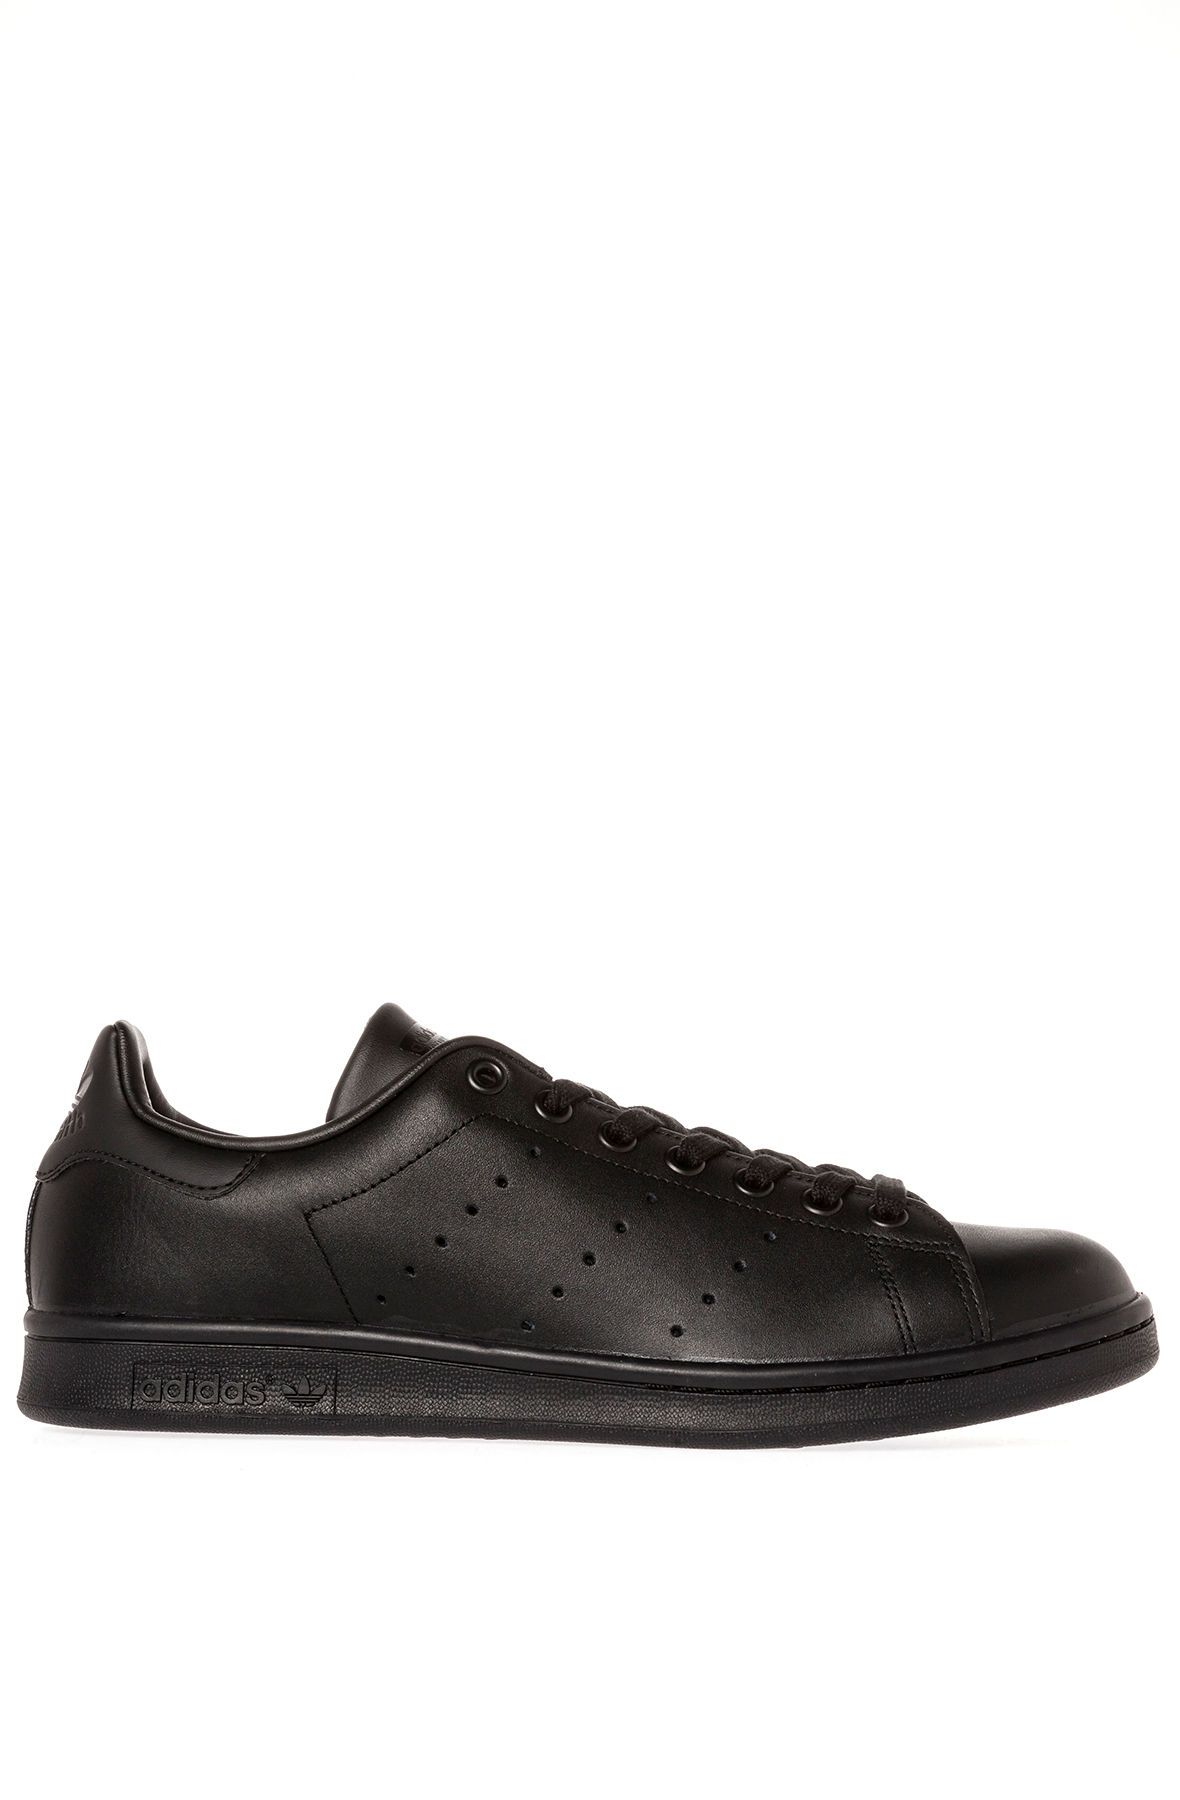 ADIDAS The Stan Smith Sneaker in M20327 - Shiekh